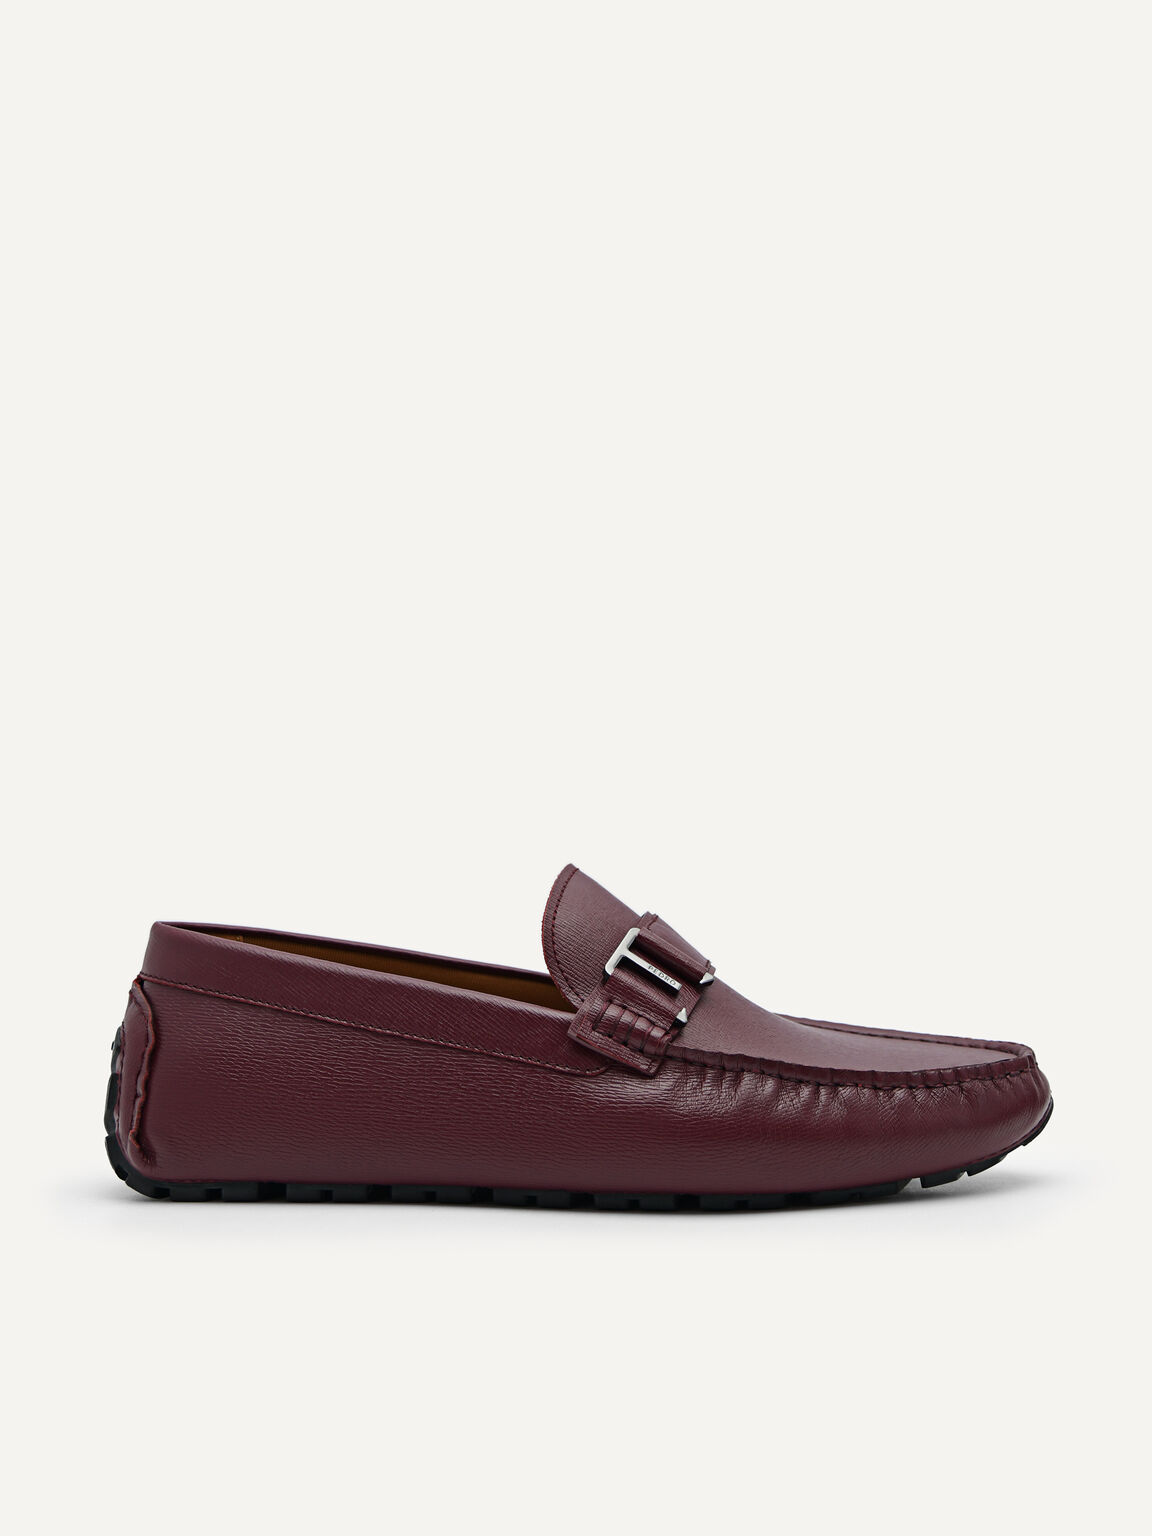 Leather Driving Moccassins, Maroon